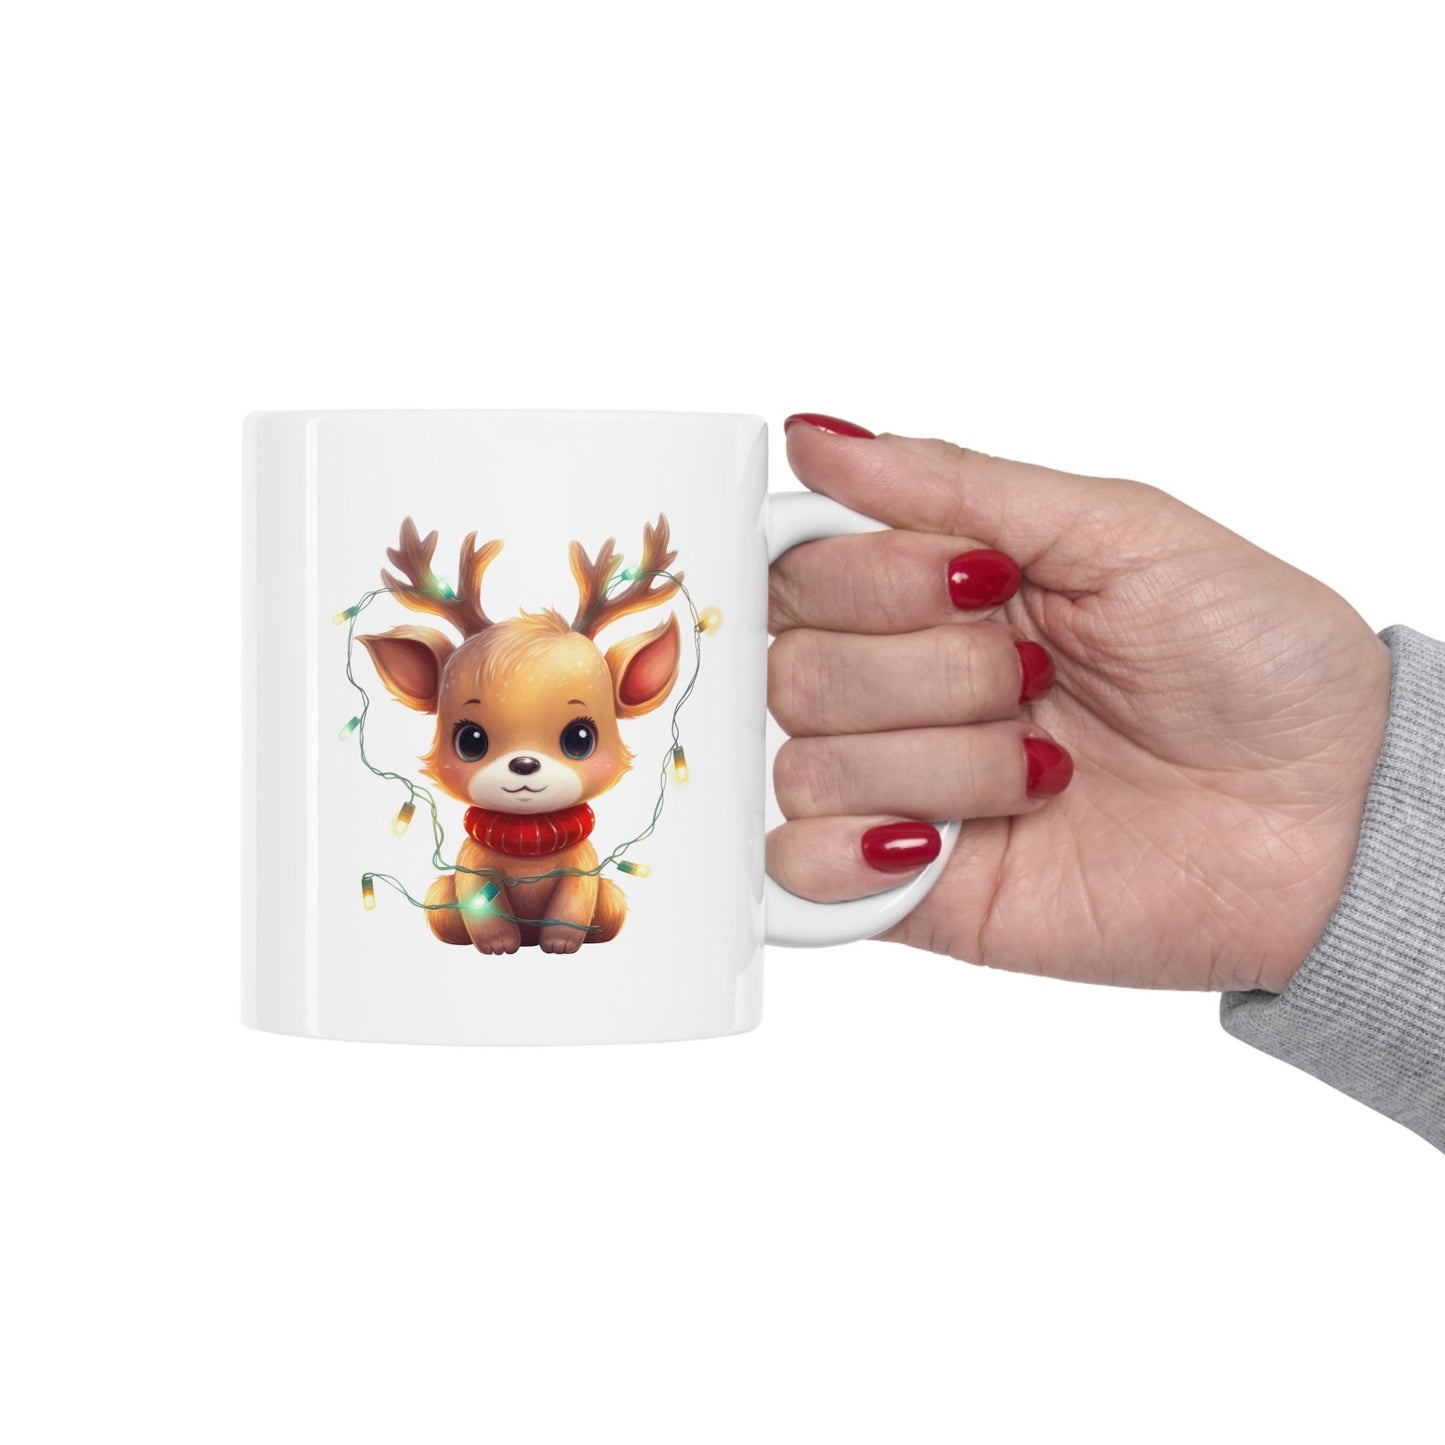 The Reindeer with Lights Christmas Mug Makes the Perfect Gift for Friends, Family, Coworkers or yourself.  Check Out My Shop for even more Great Designs.
www.scorpiontees.etsy.com